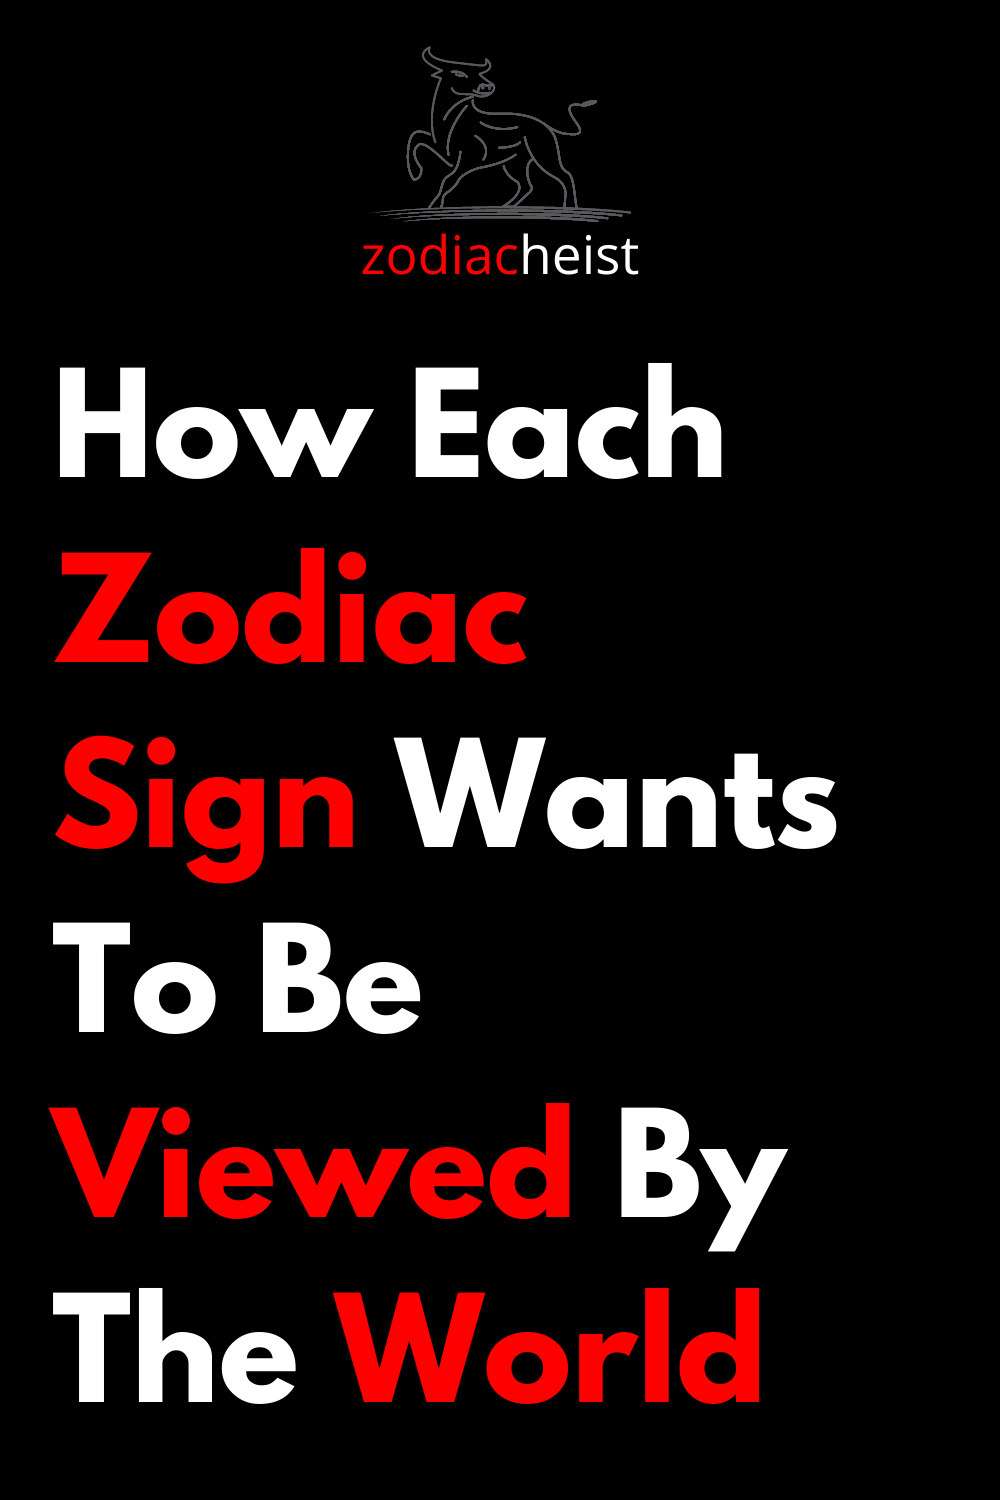 How Each Zodiac Sign Wants To Be Viewed By The World